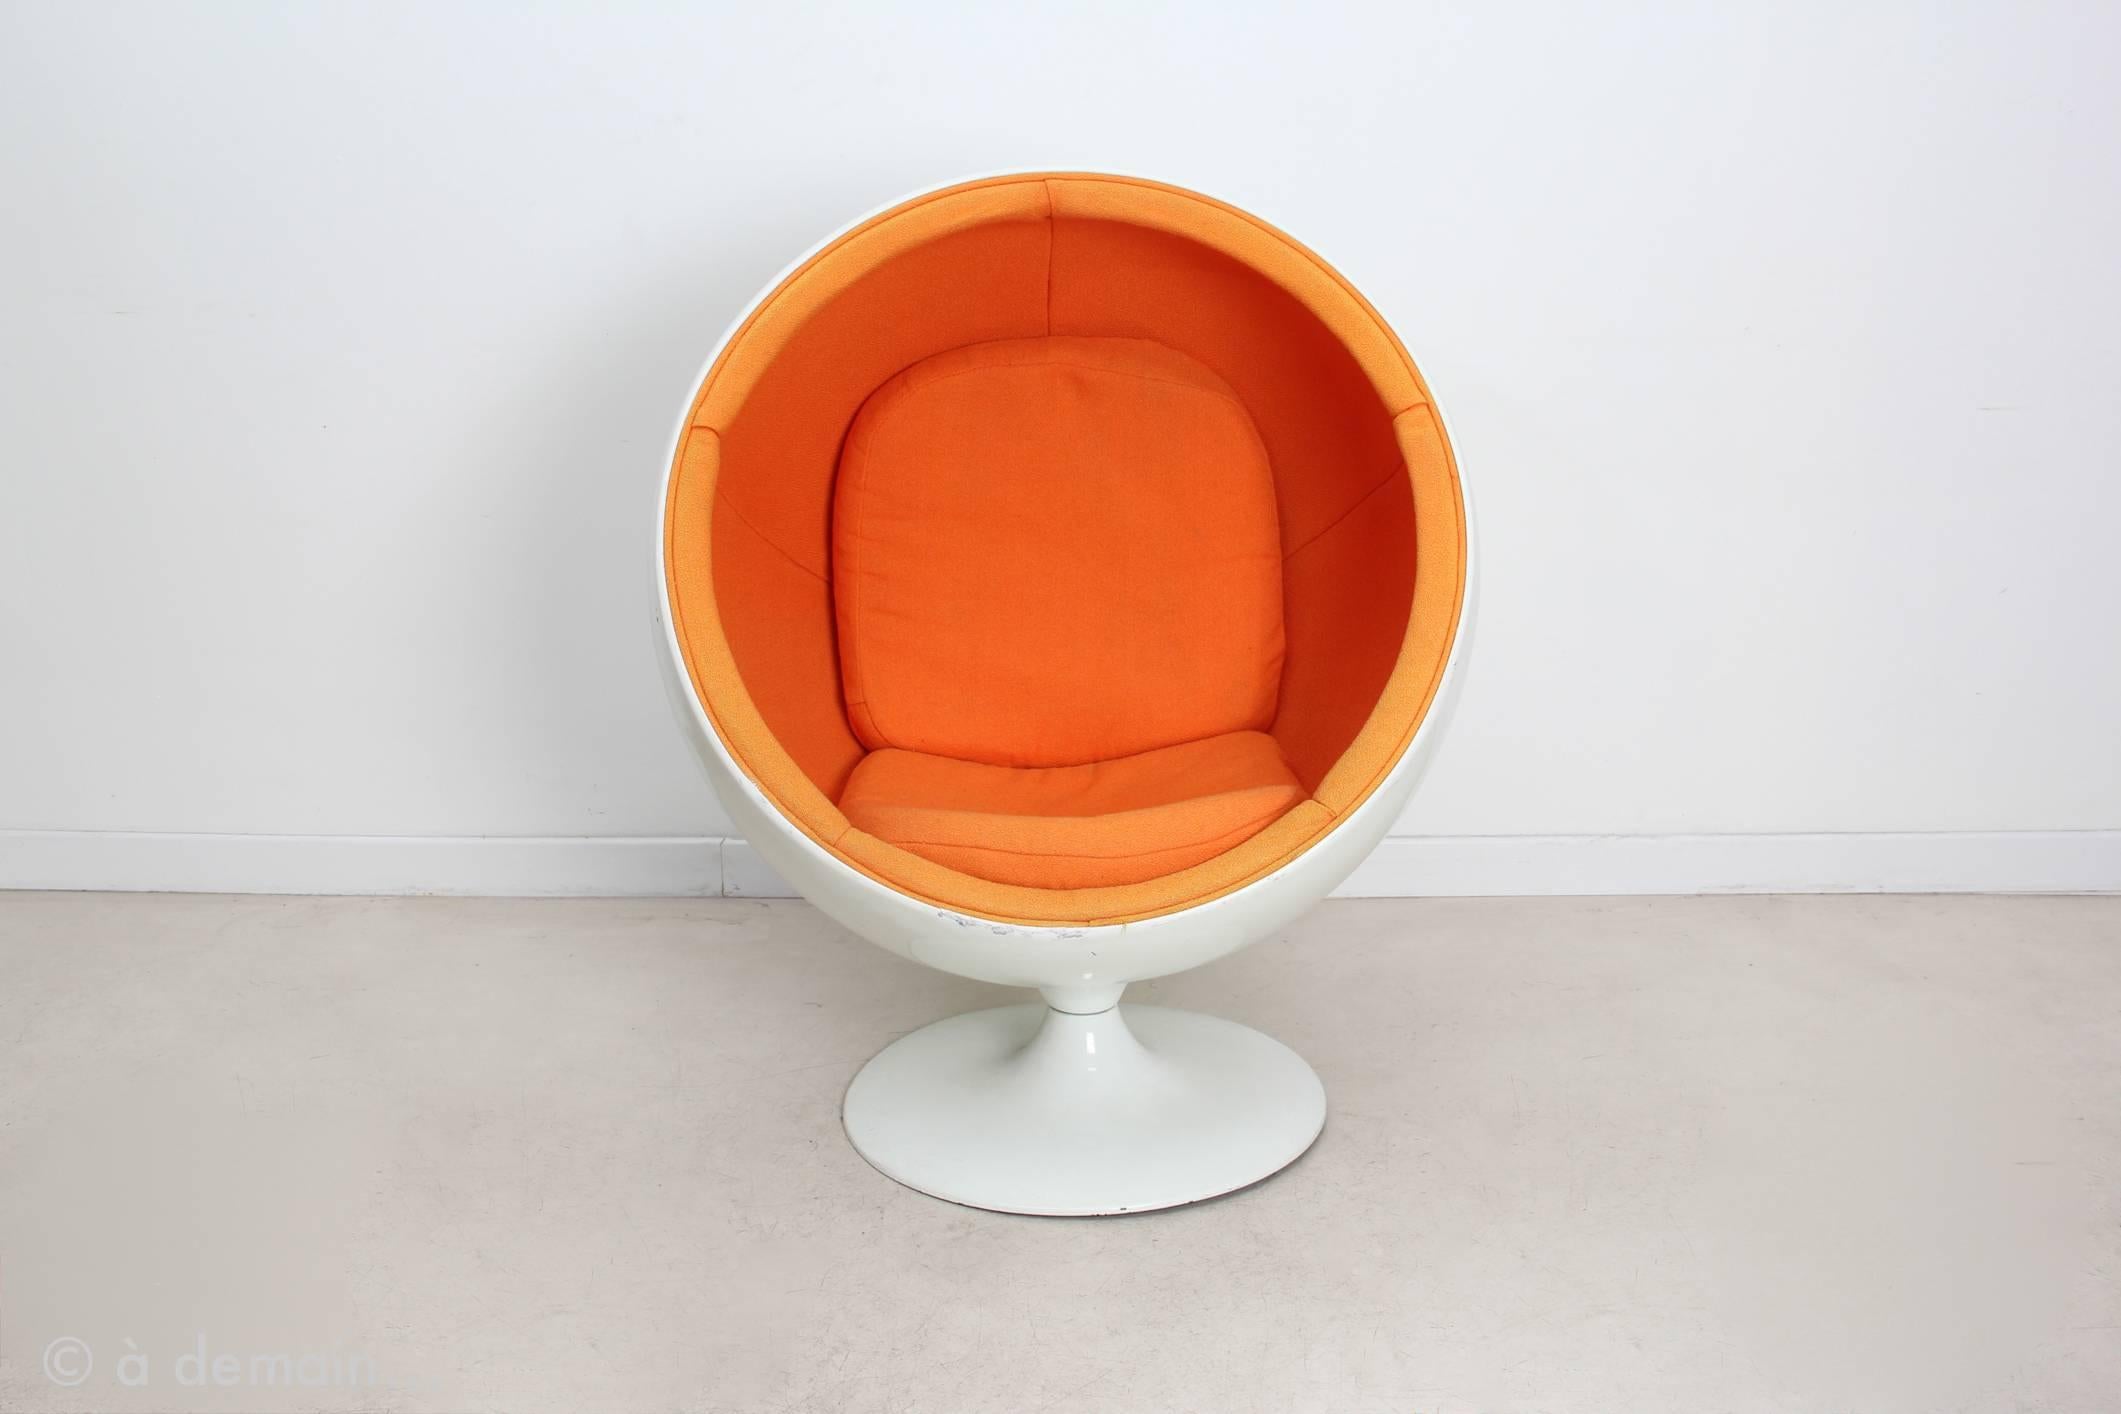 Rare kids version of the ball chair designed by Eero Aarnio. 

The Finnish designer Eero Aarnio was born in 1932 in Helsinki. He is one of the greatest of Finnish design from the sixties, very famous thanks to his Ball Chair designed between 1963